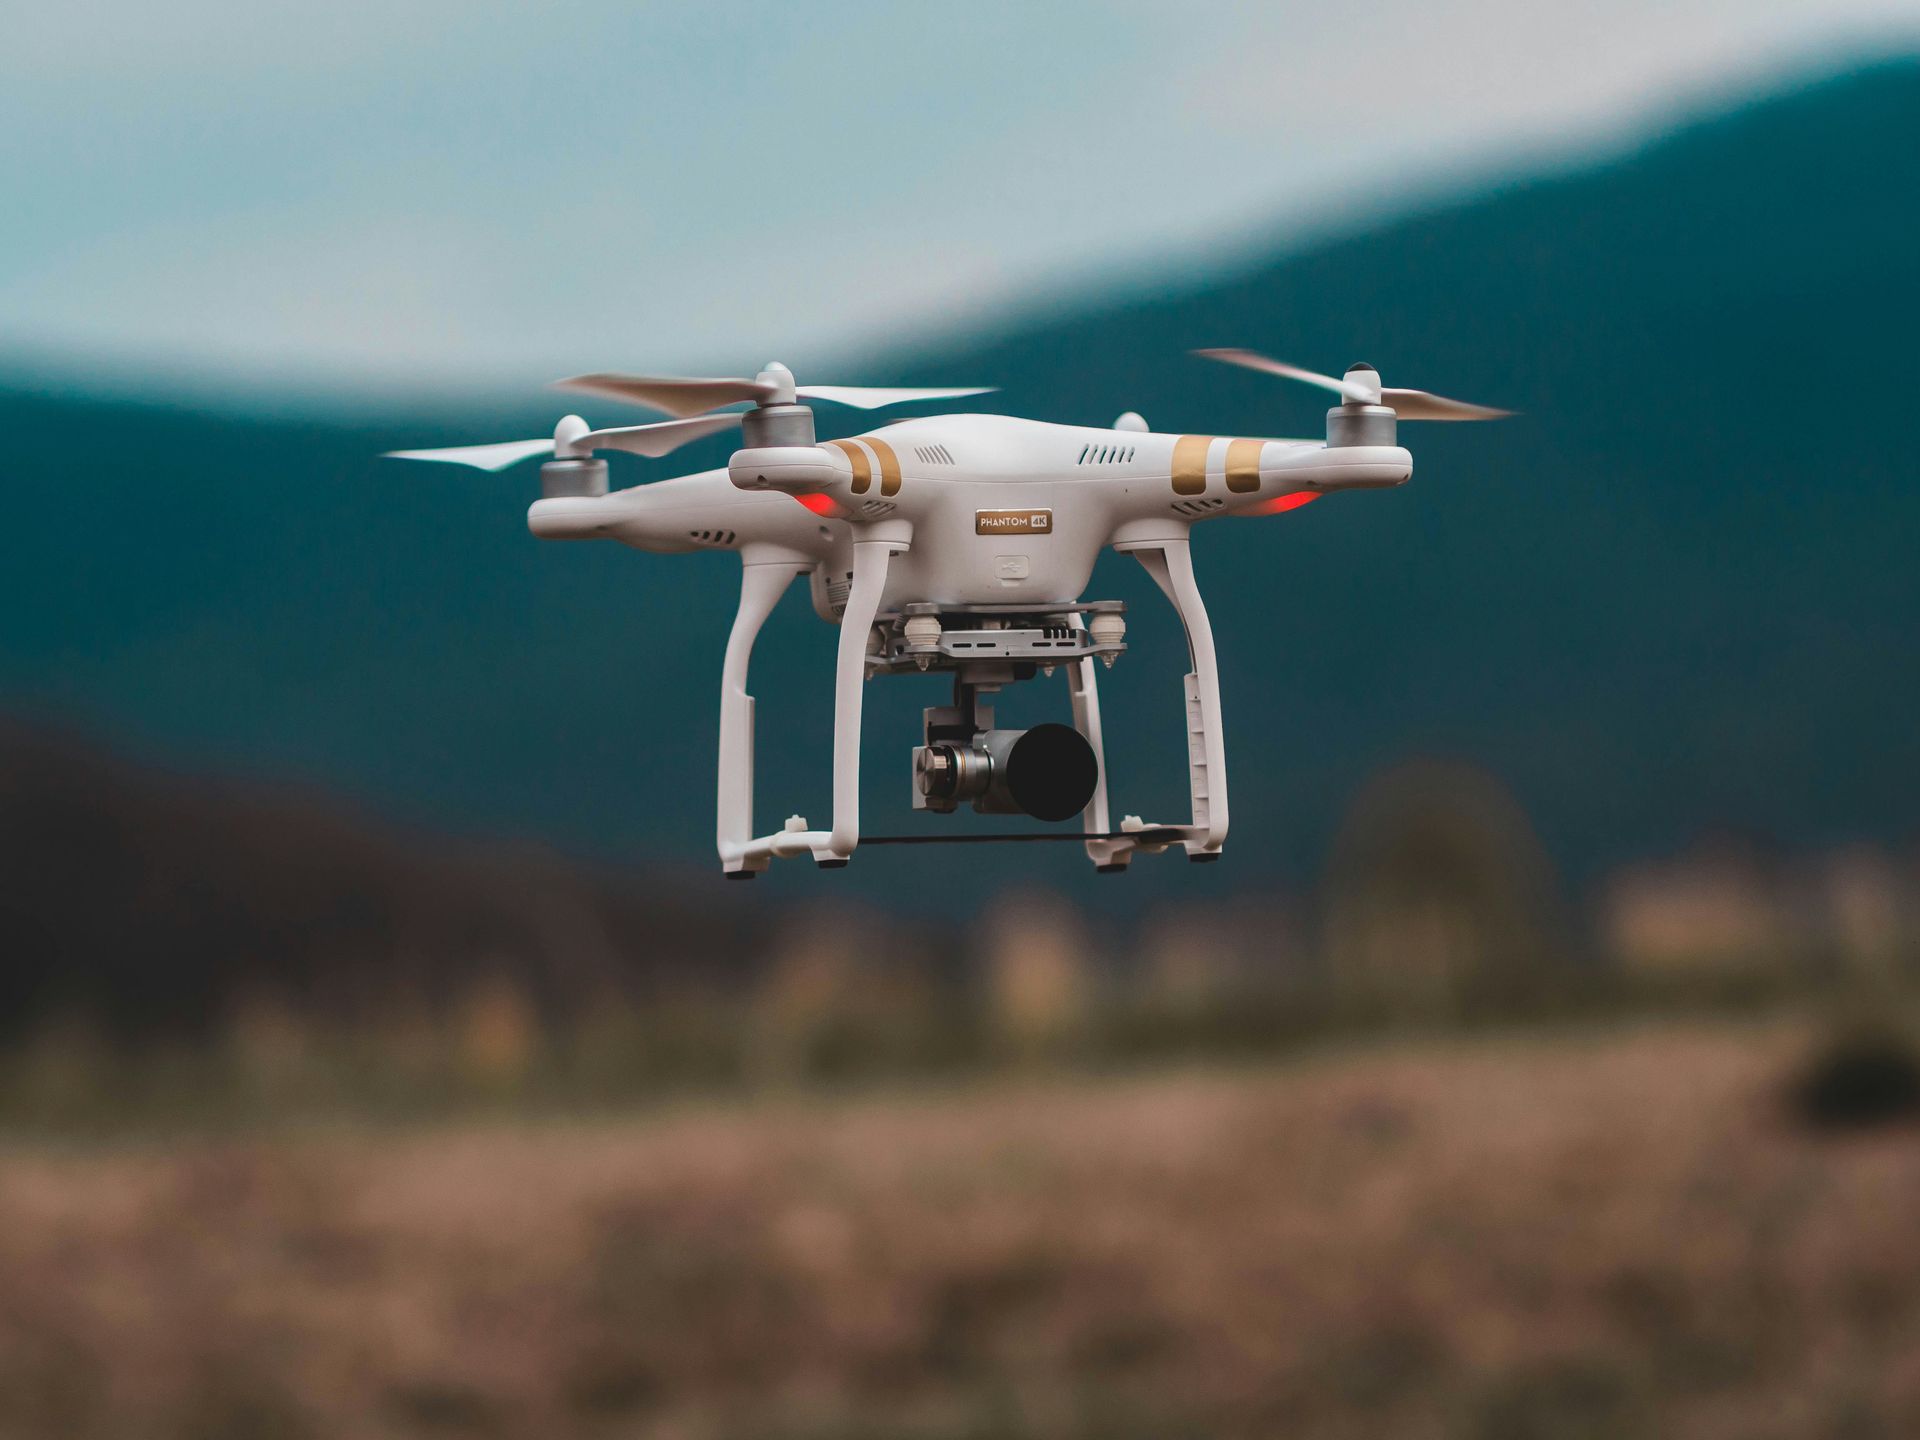 A drone is flying over a field with mountains in the background.